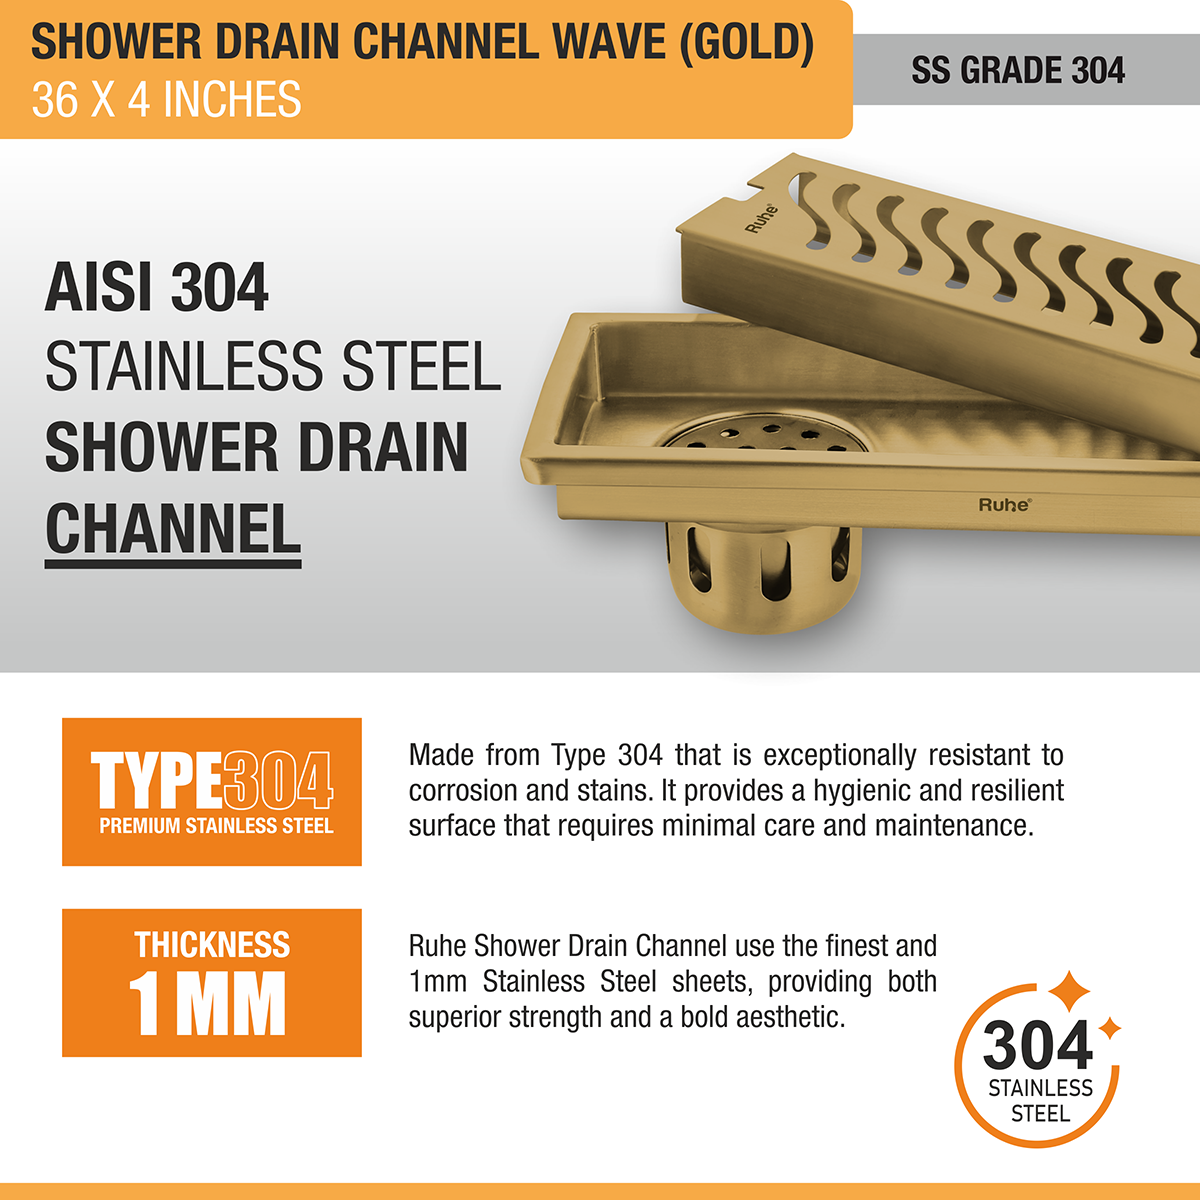 Wave Shower Drain Channel (36 x 4 Inches) YELLOW GOLD stainless steel